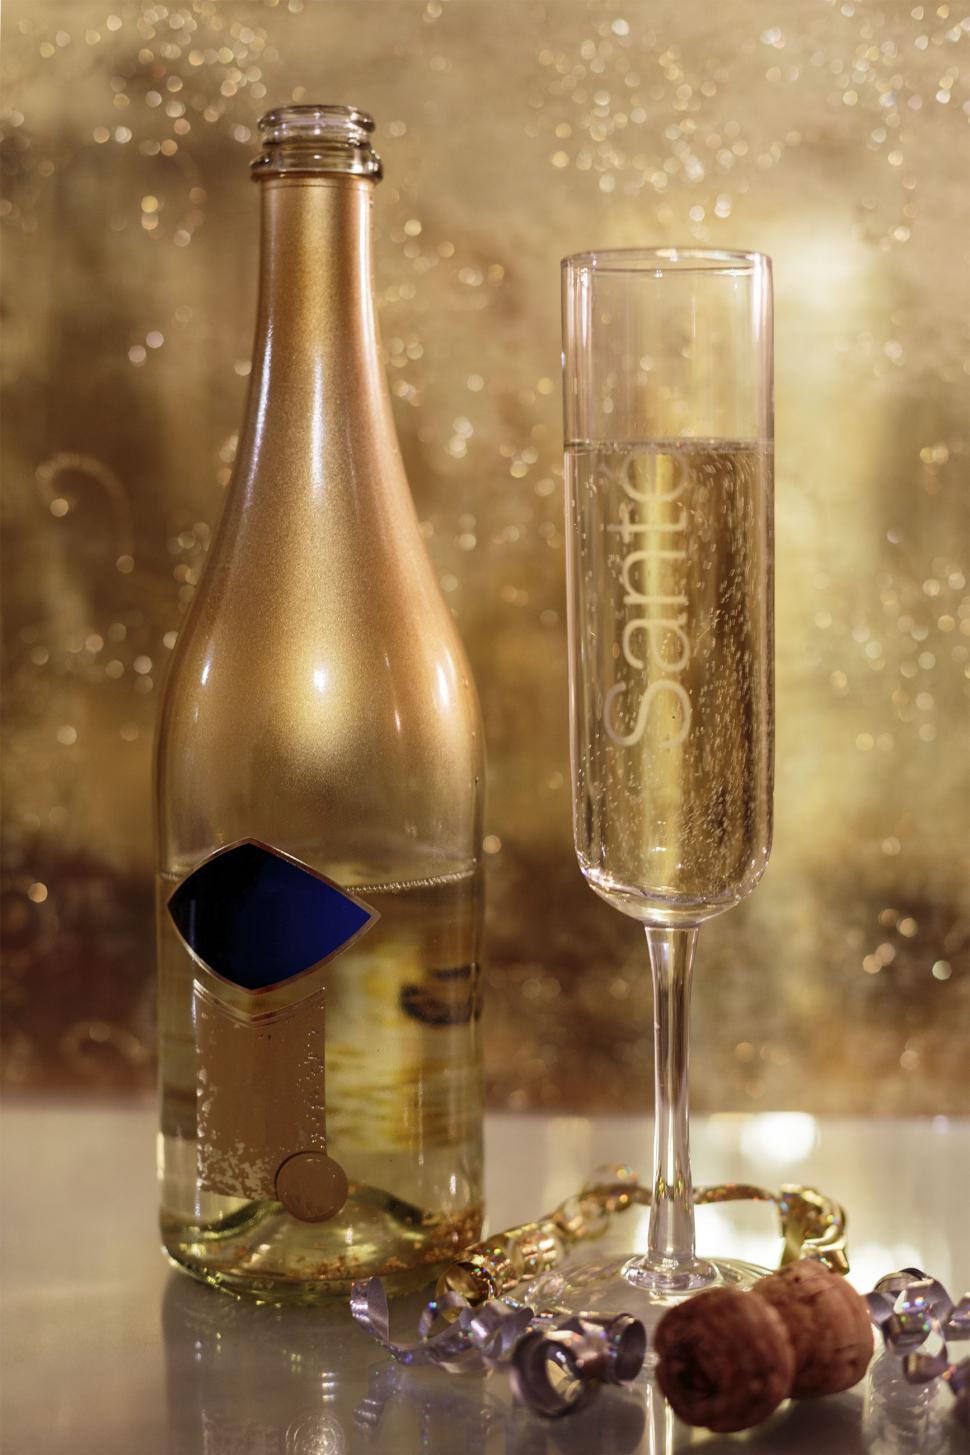 Free Image of Wine bottle, glass and cork 